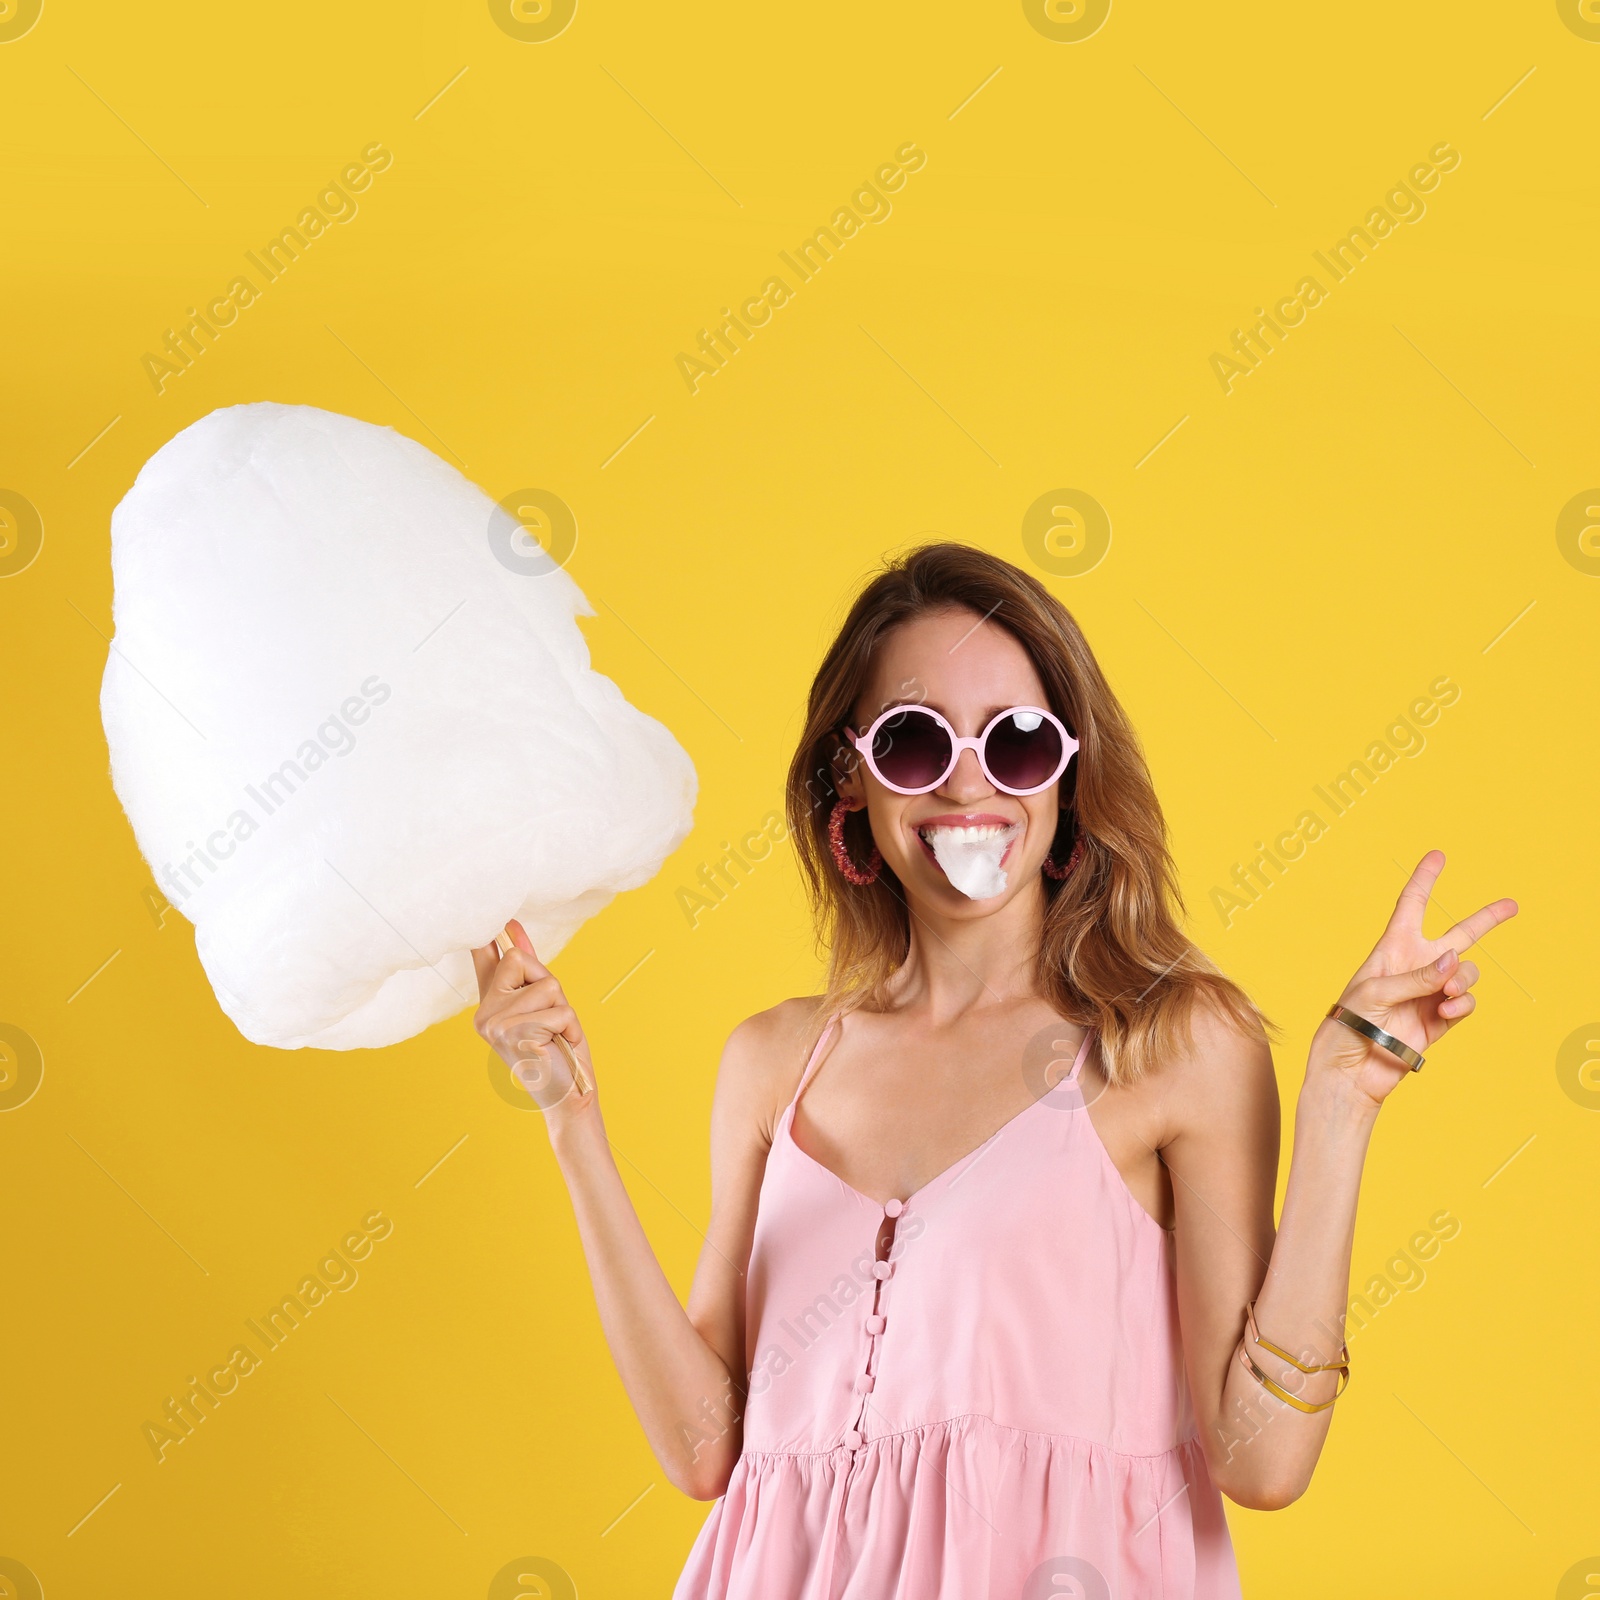 Photo of Happy young woman eating cotton candy on yellow background